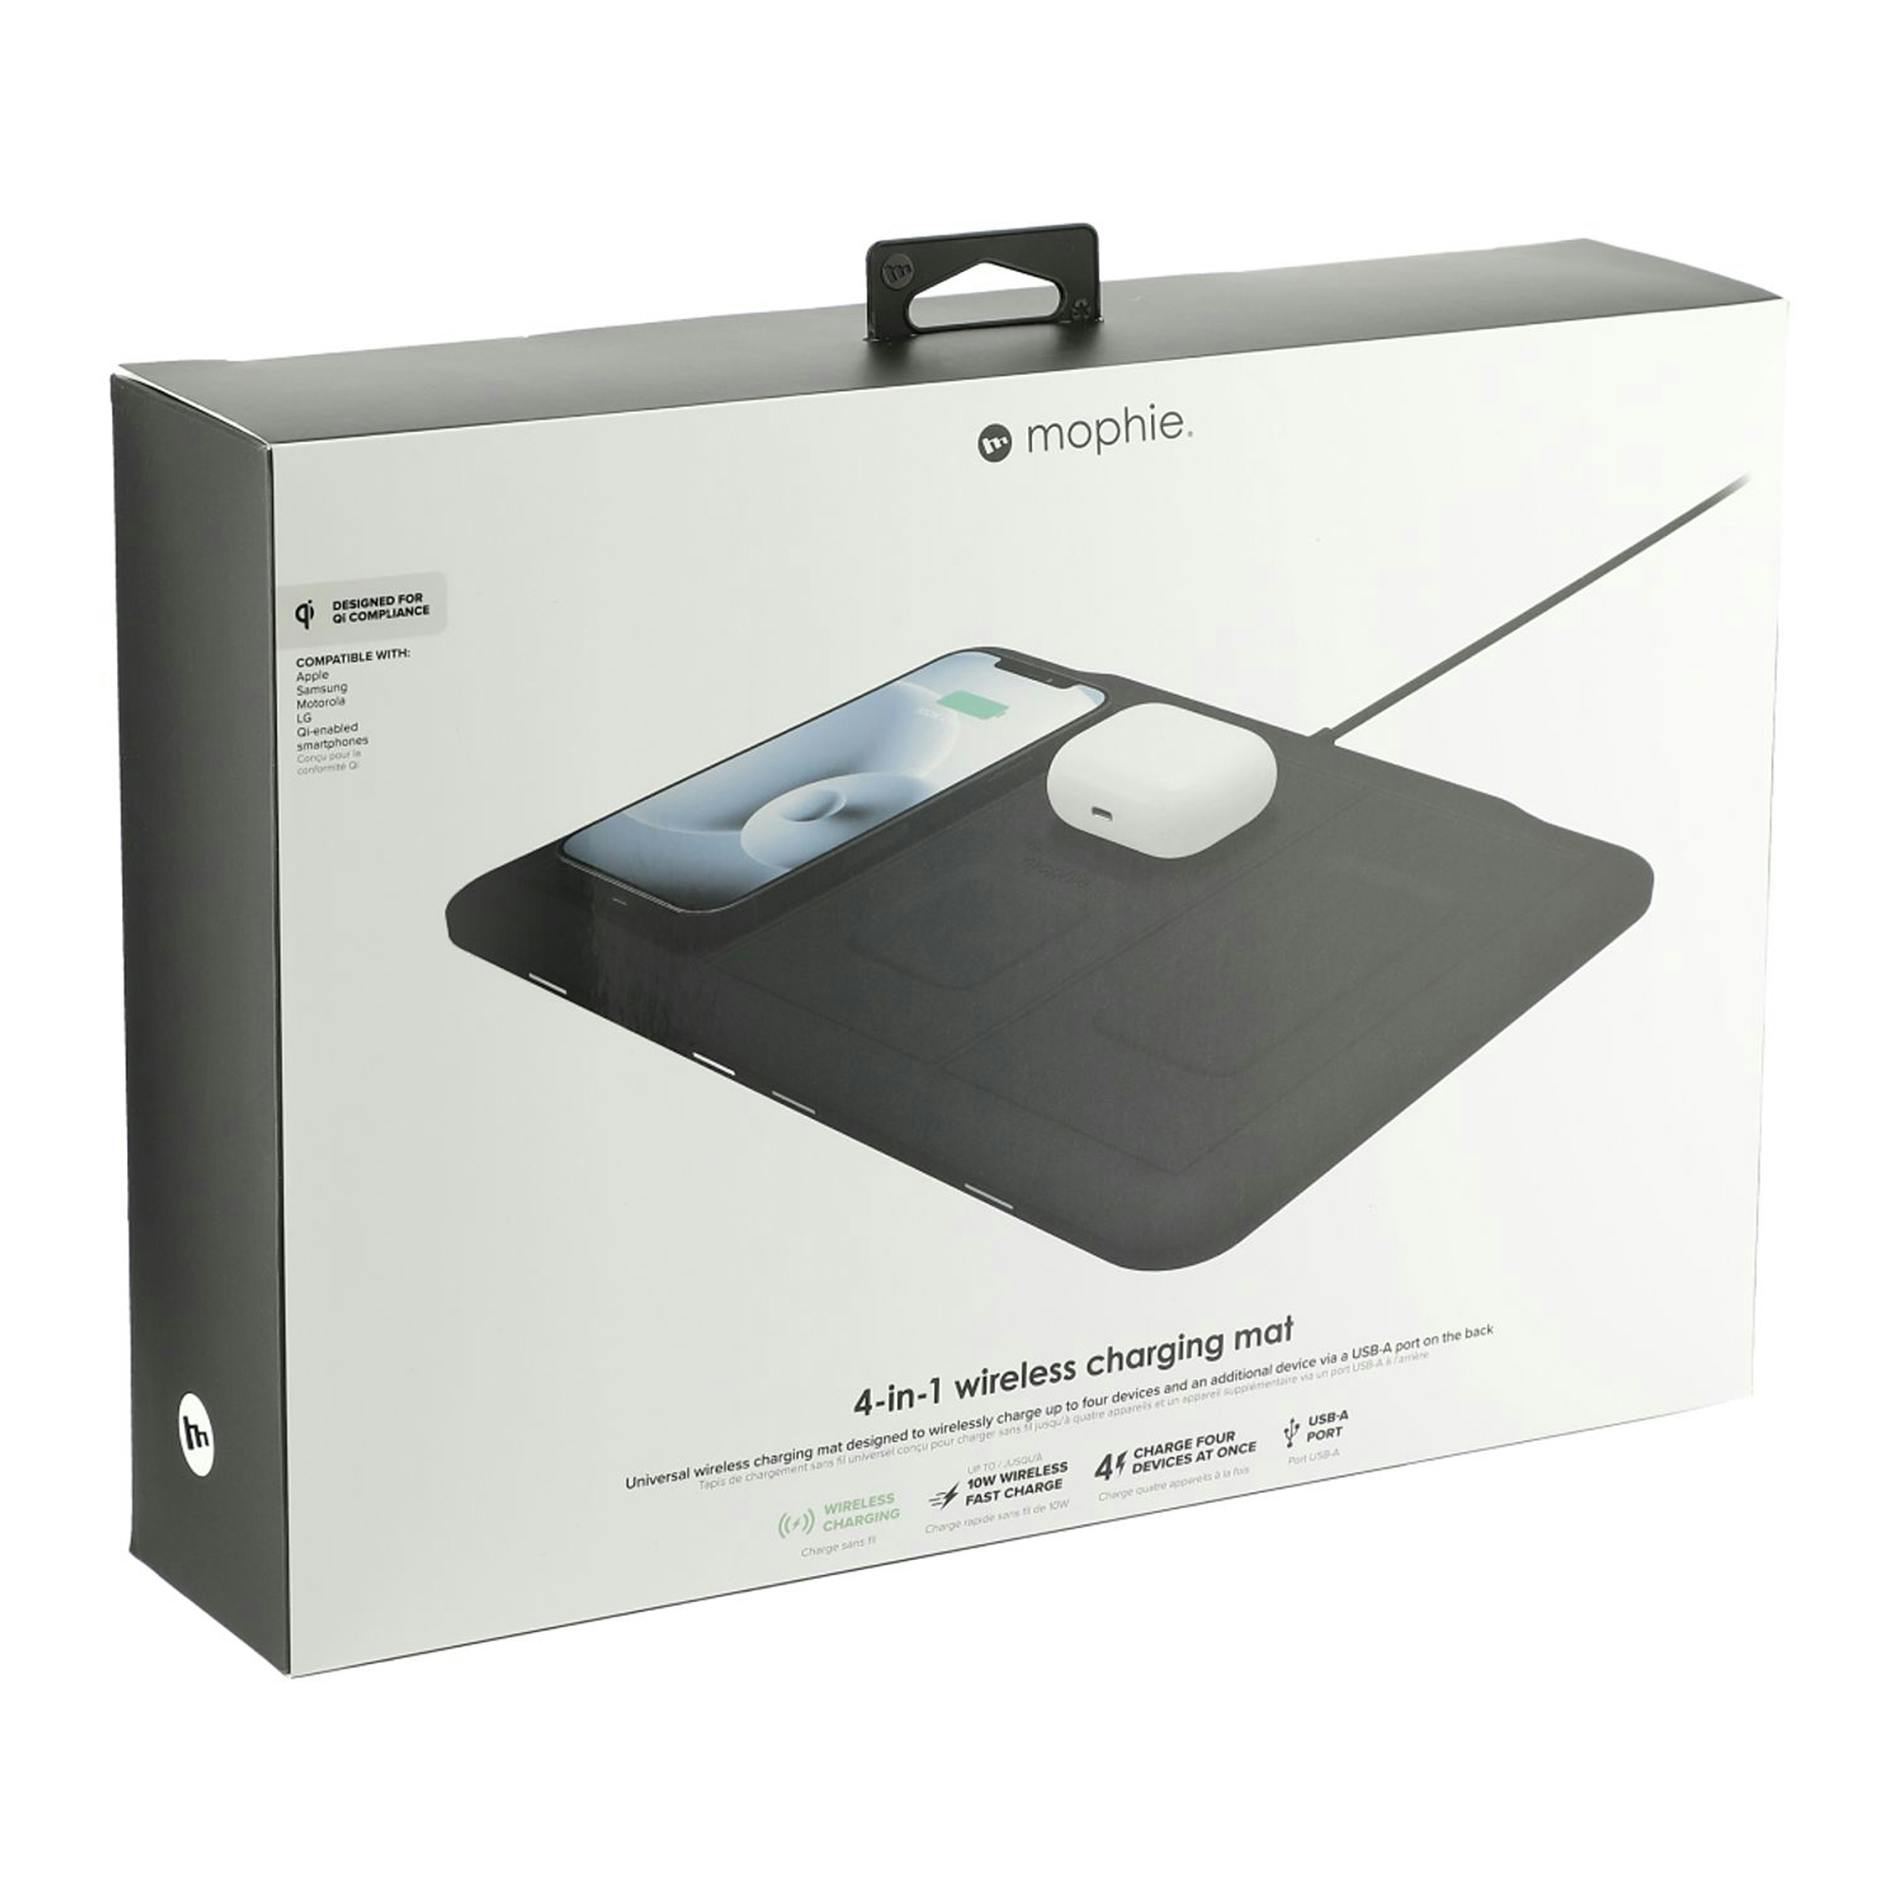 mophie® 4-in-1 Wireless Charging Mat - additional Image 2